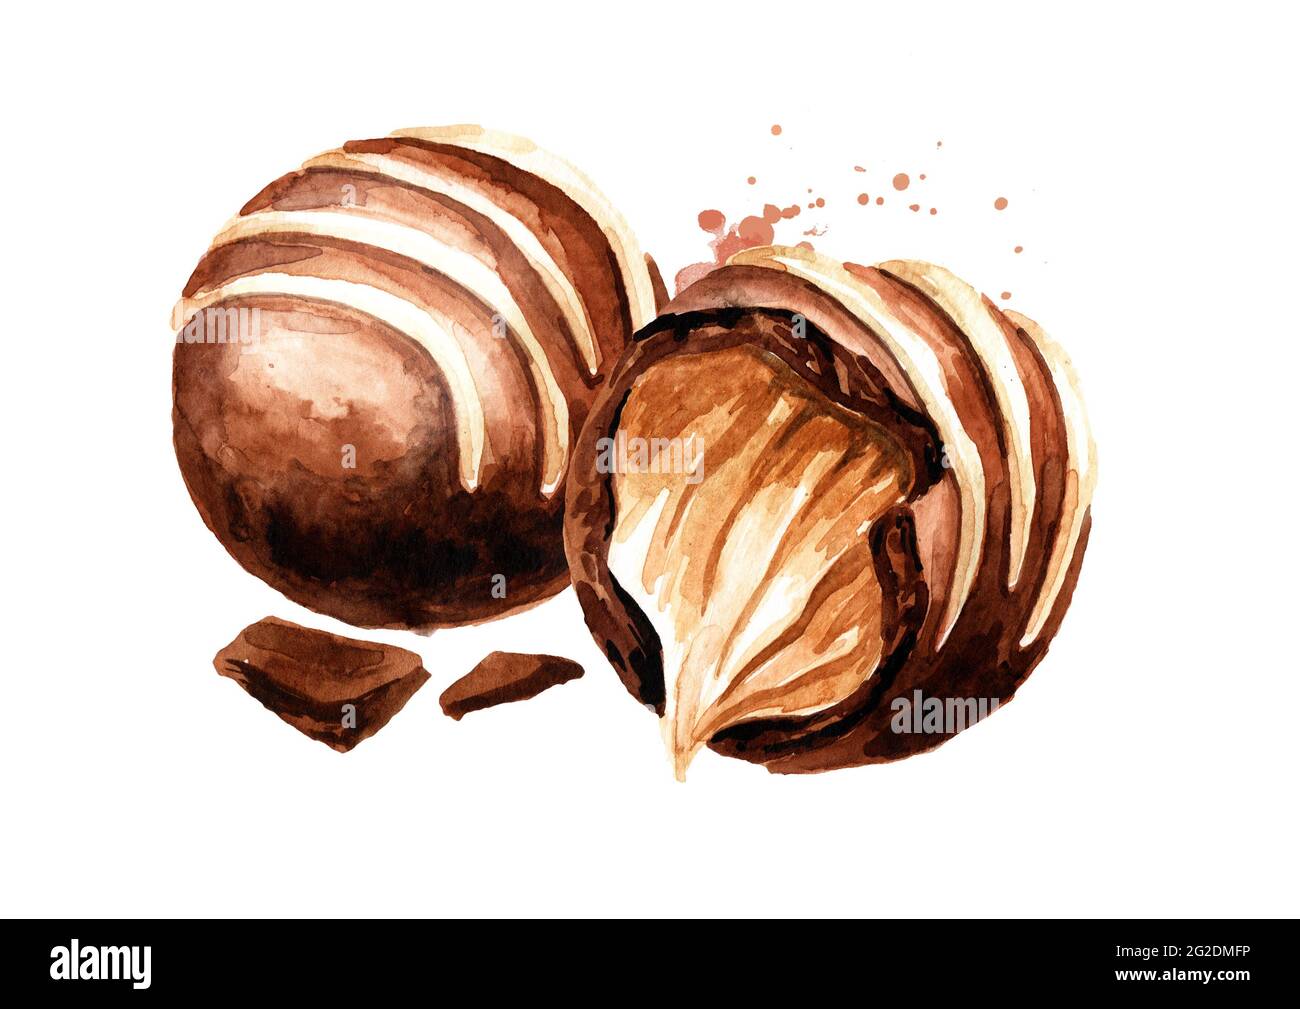 Chocolate candy truffle with soft caramel praline filling. Hand drawn watercolor illustration isolated on white background Stock Photo